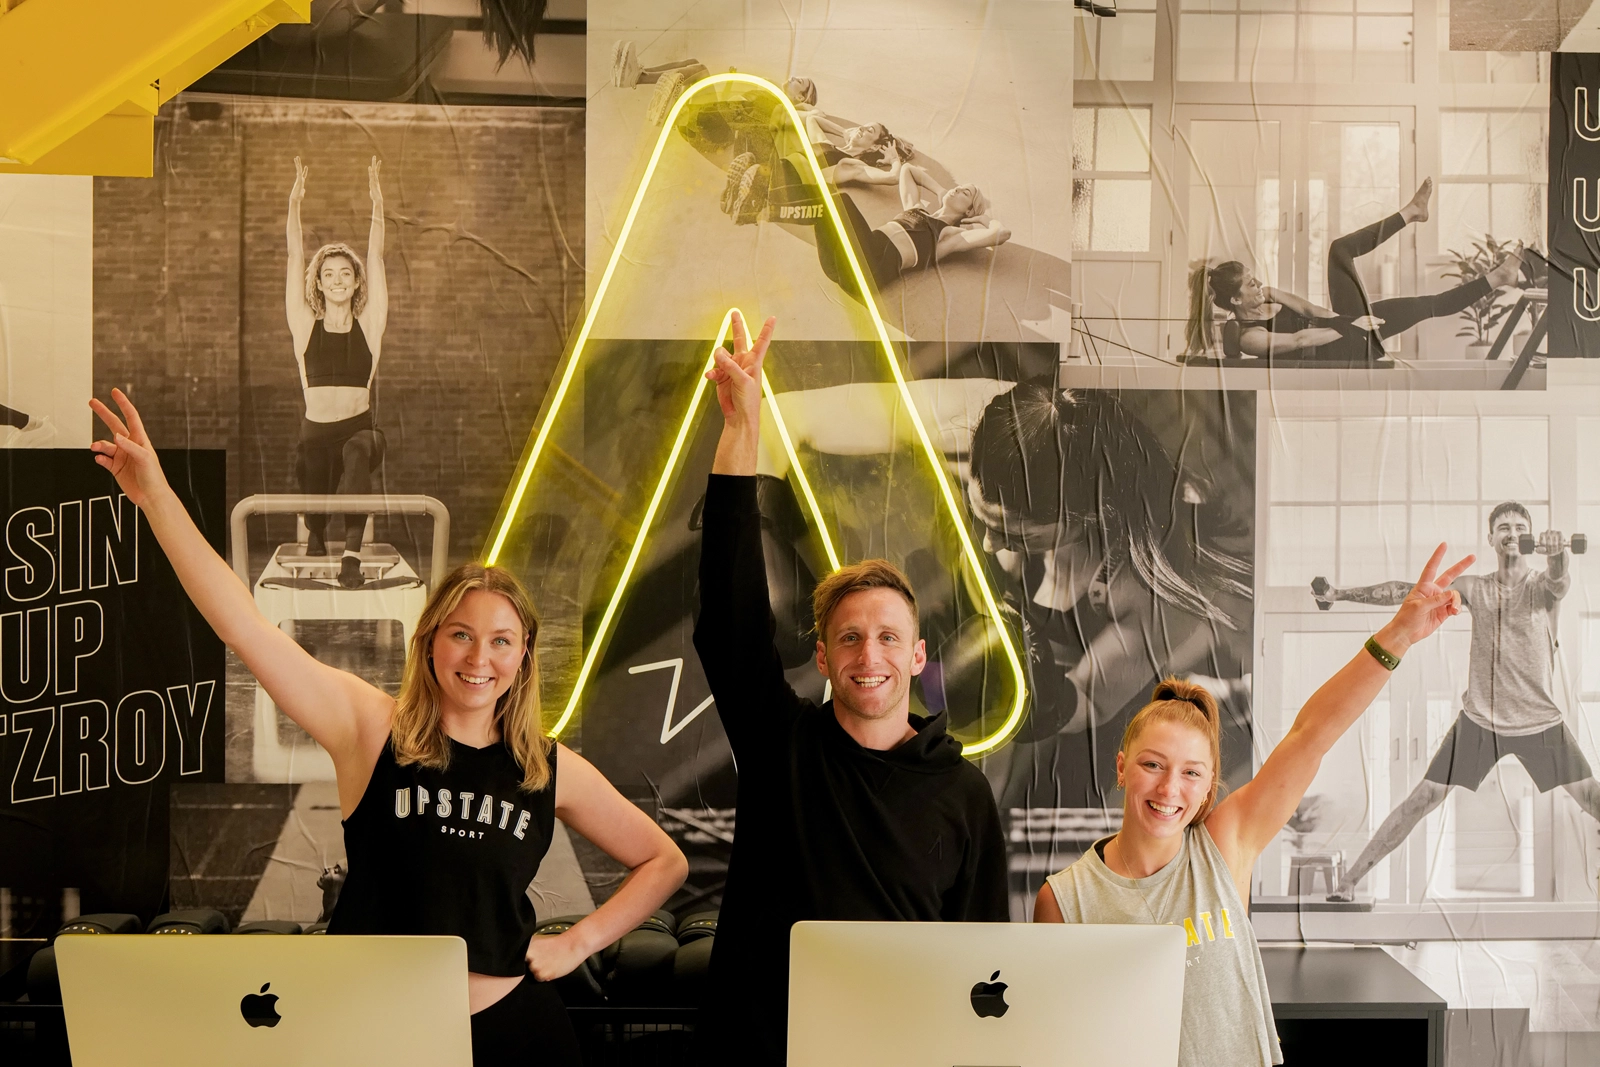 Team of employees at Upstate Studios raise their arms to the sky in celebration as they welcome people to apply for for roles to join their team. Background is front desk of studio and upbeat neon signage.